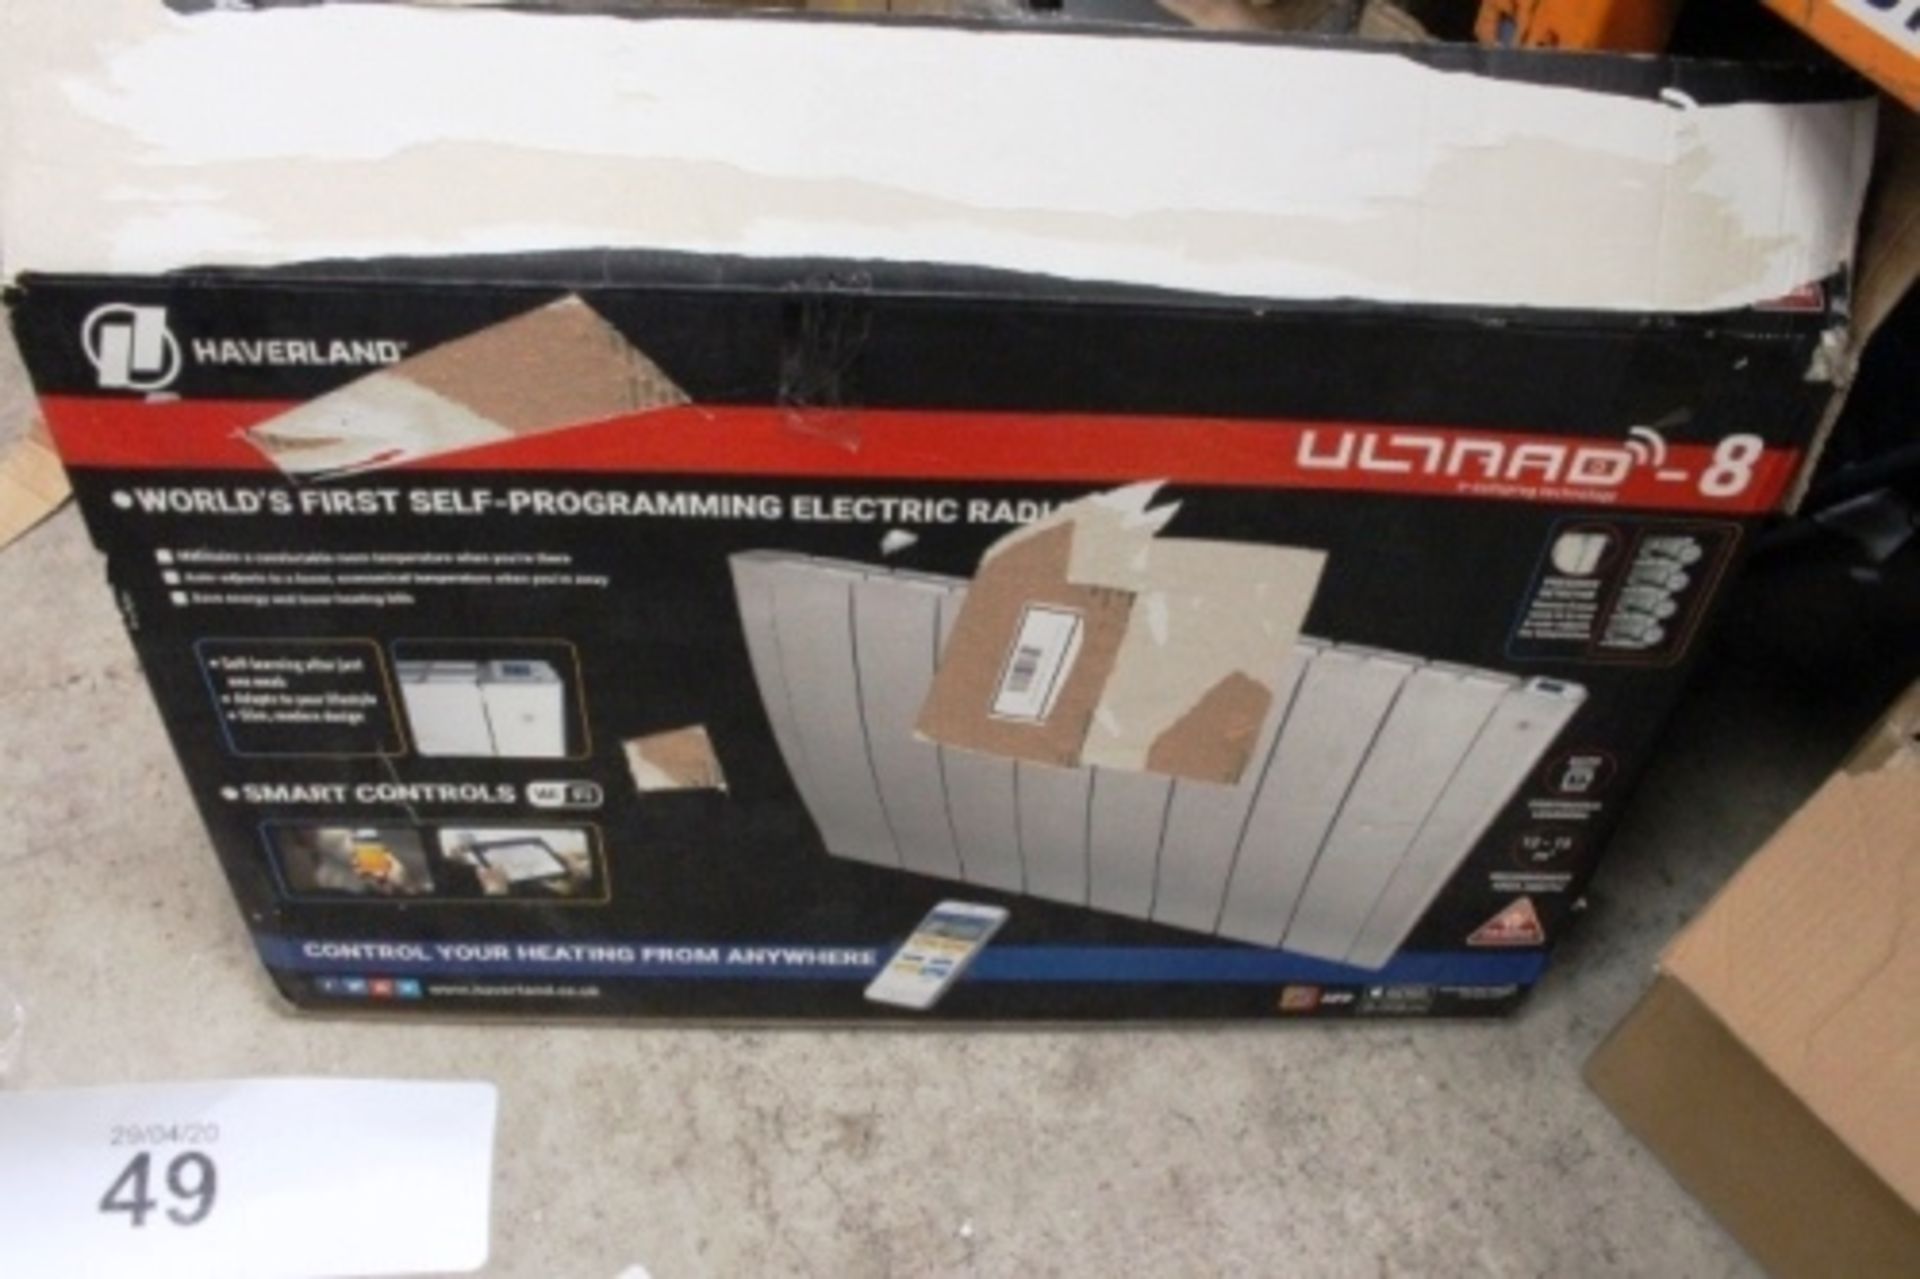 A Haverland self-programming electric radiator, ULTRAD-8, 1250W - New, untested (ES2)